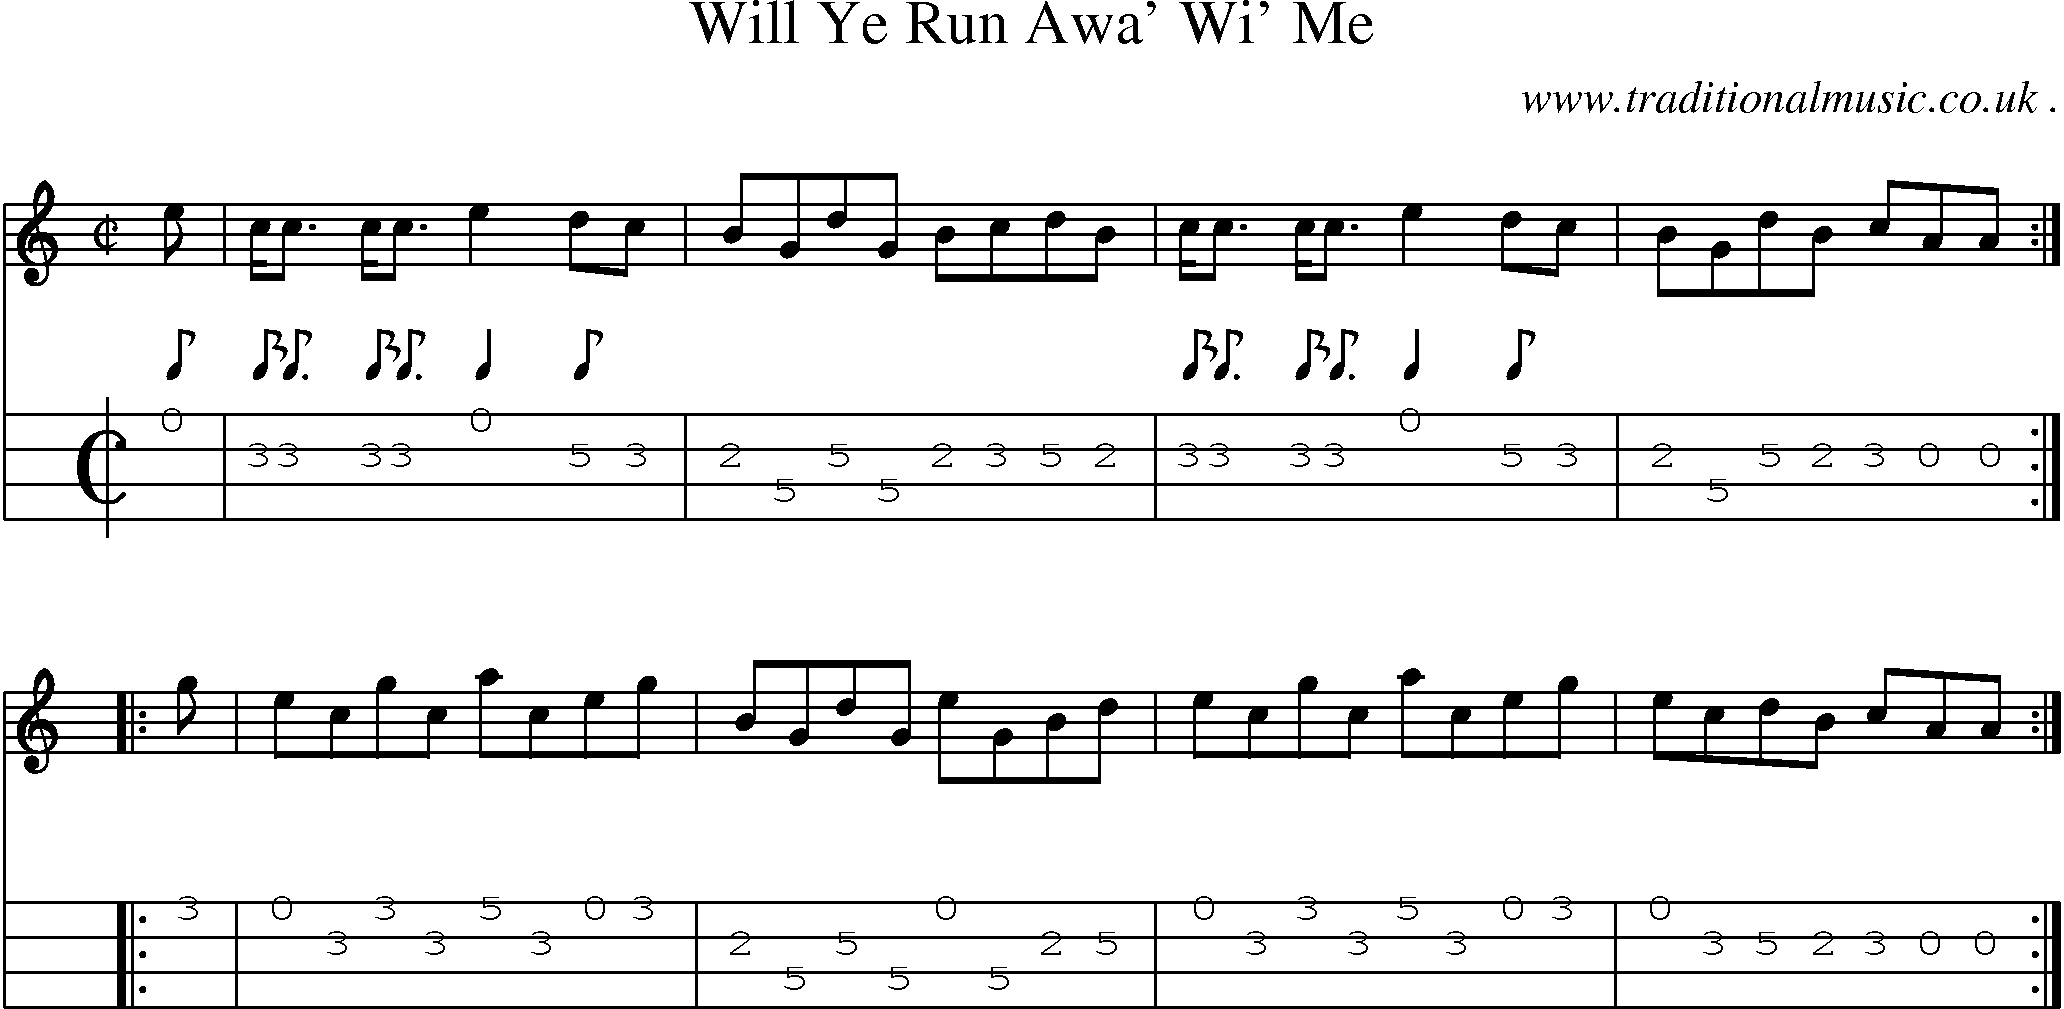 Sheet-music  score, Chords and Mandolin Tabs for Will Ye Run Awa Wi Me